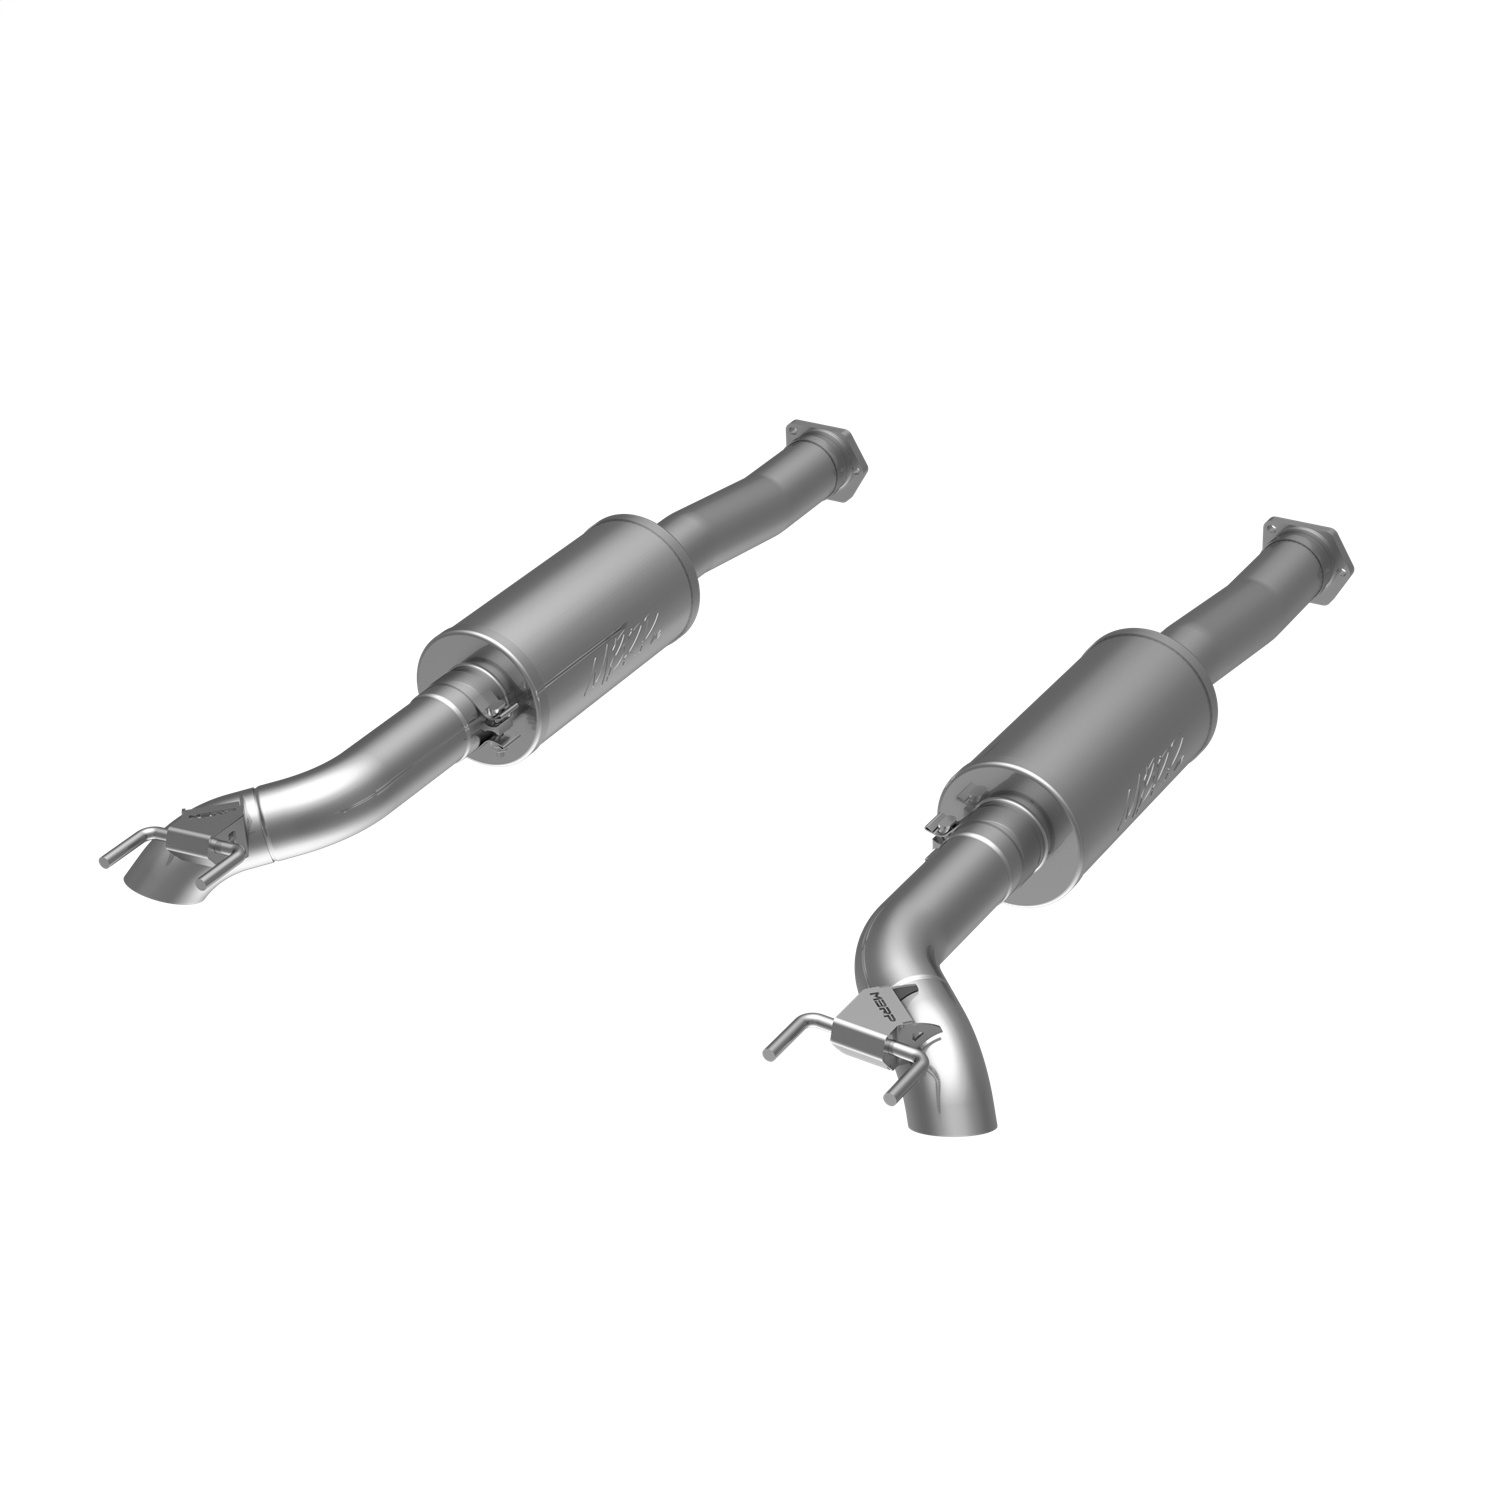 MBRP Exhaust S5600304 Armor Pro Cat Back Exhaust System